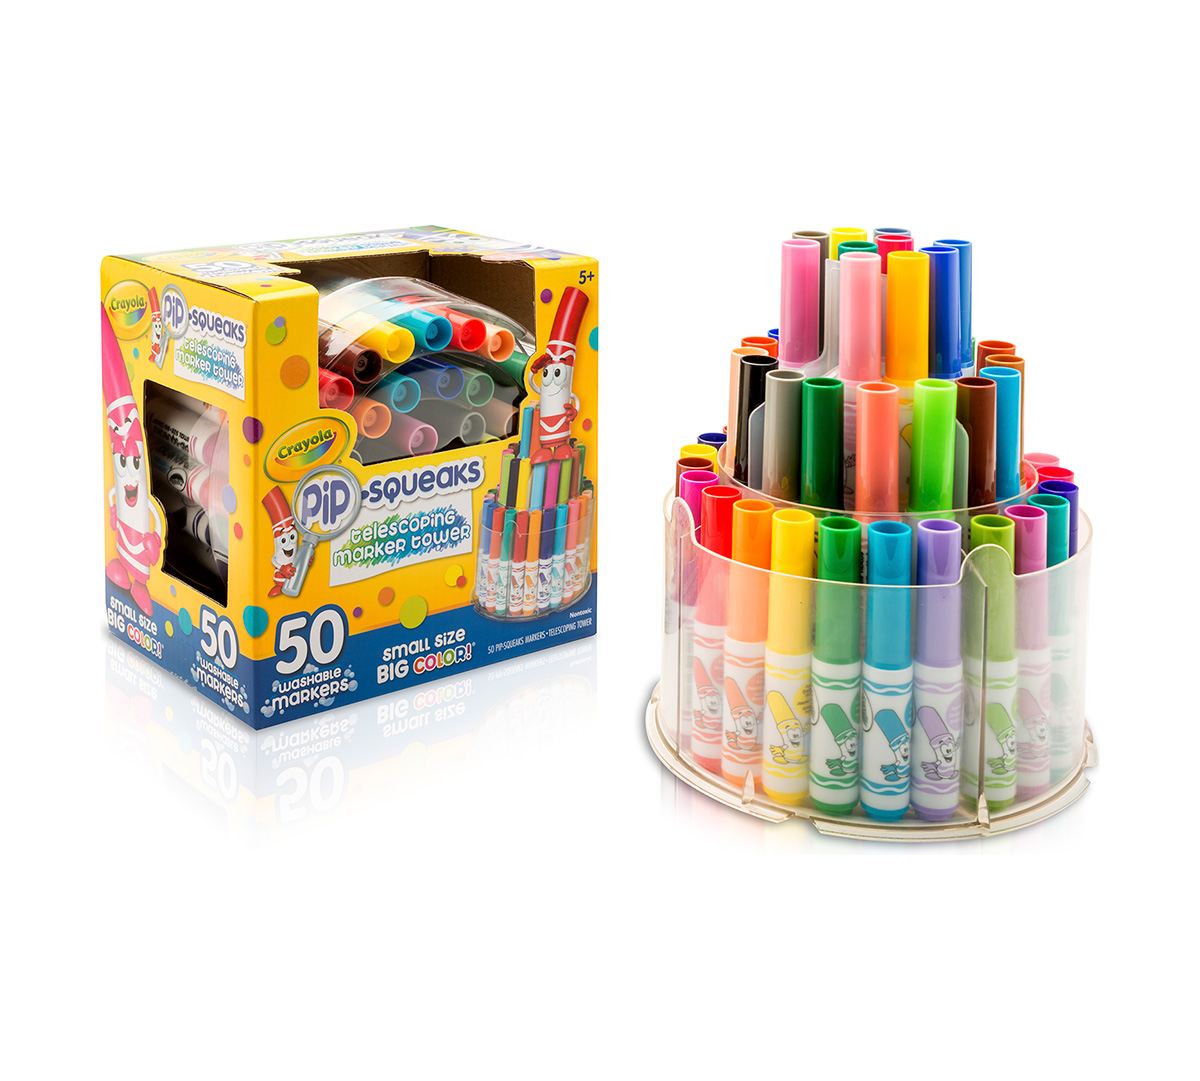 Crayola Window Markers Coloring Set with Storage Case, Beginner